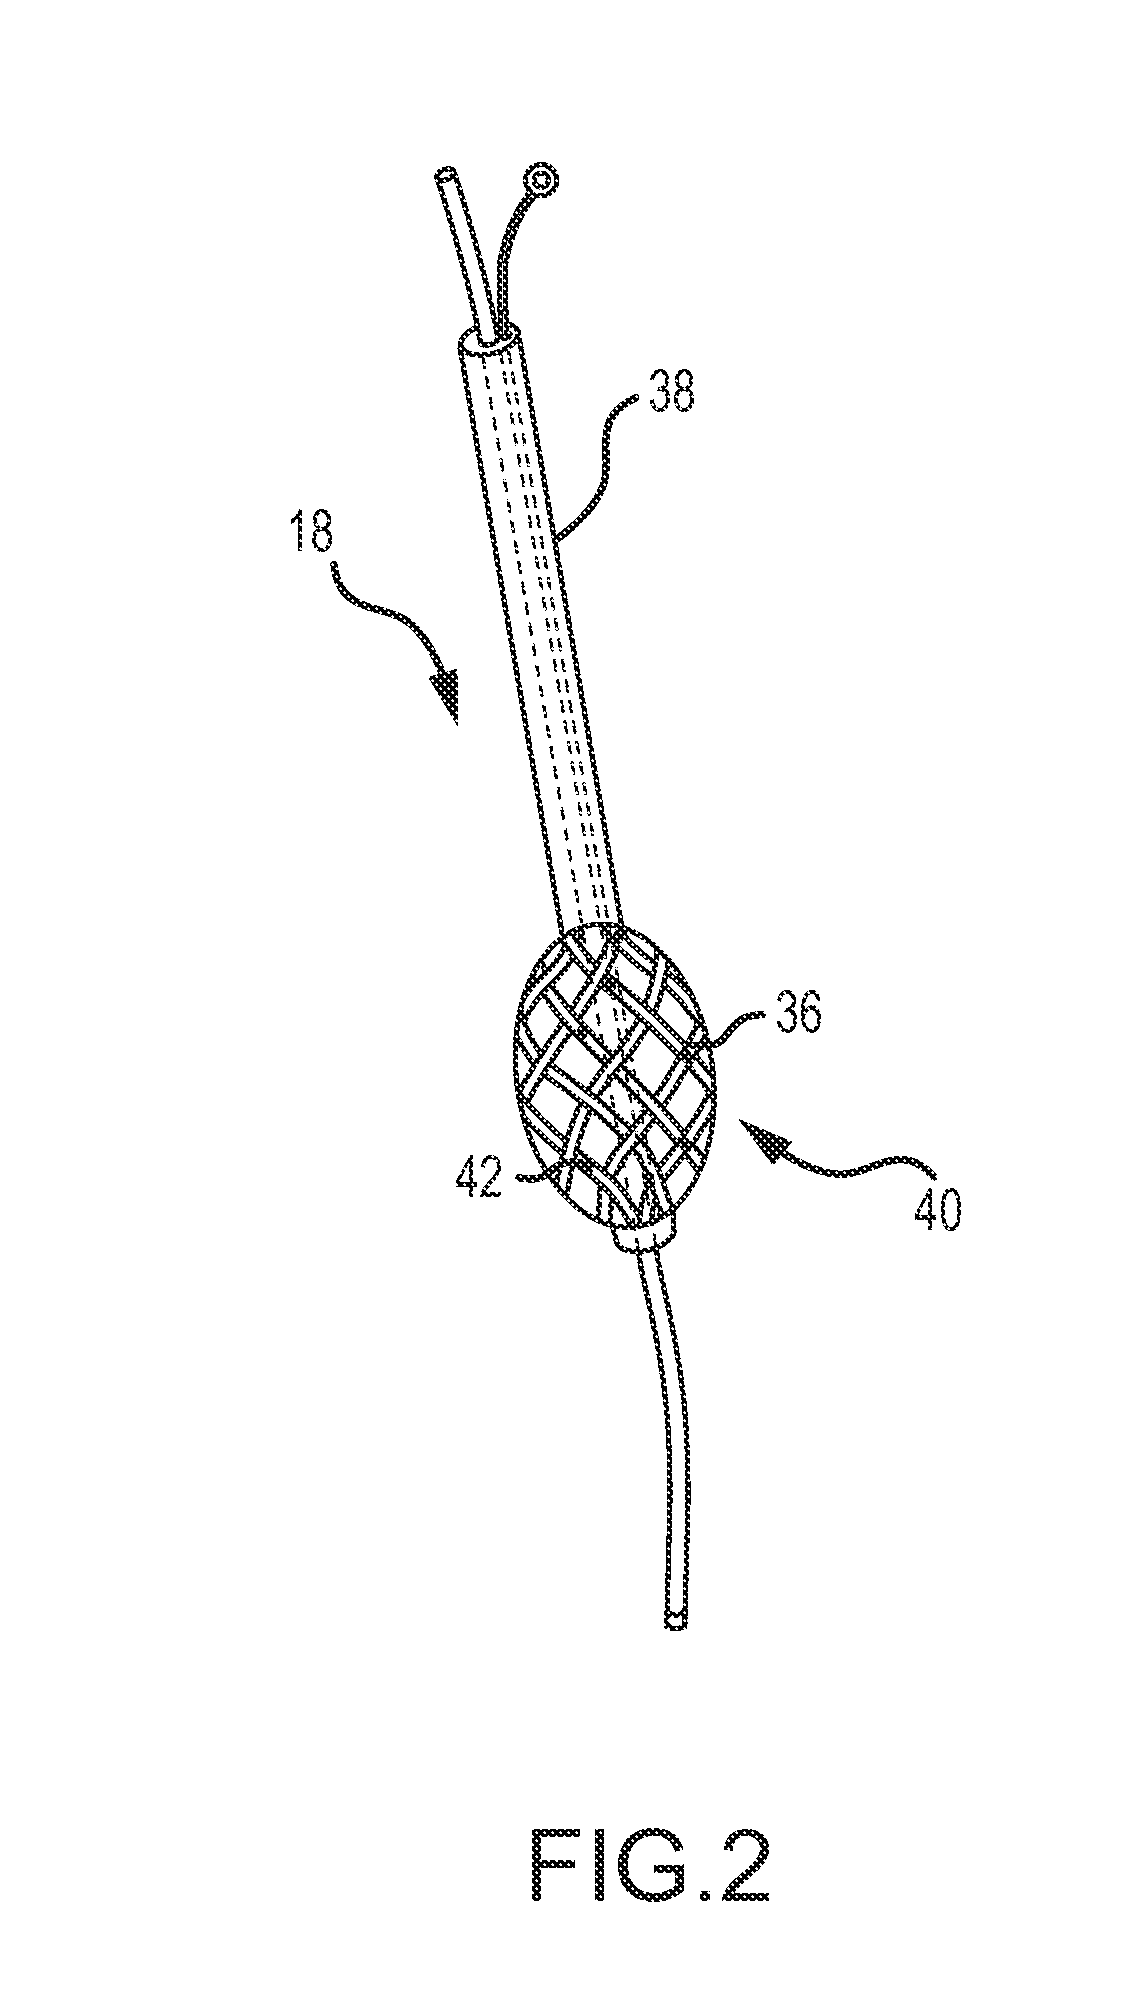 System for optimized coupling of ablation catheters to body tissues and evaulation of lesions formed by the catheters